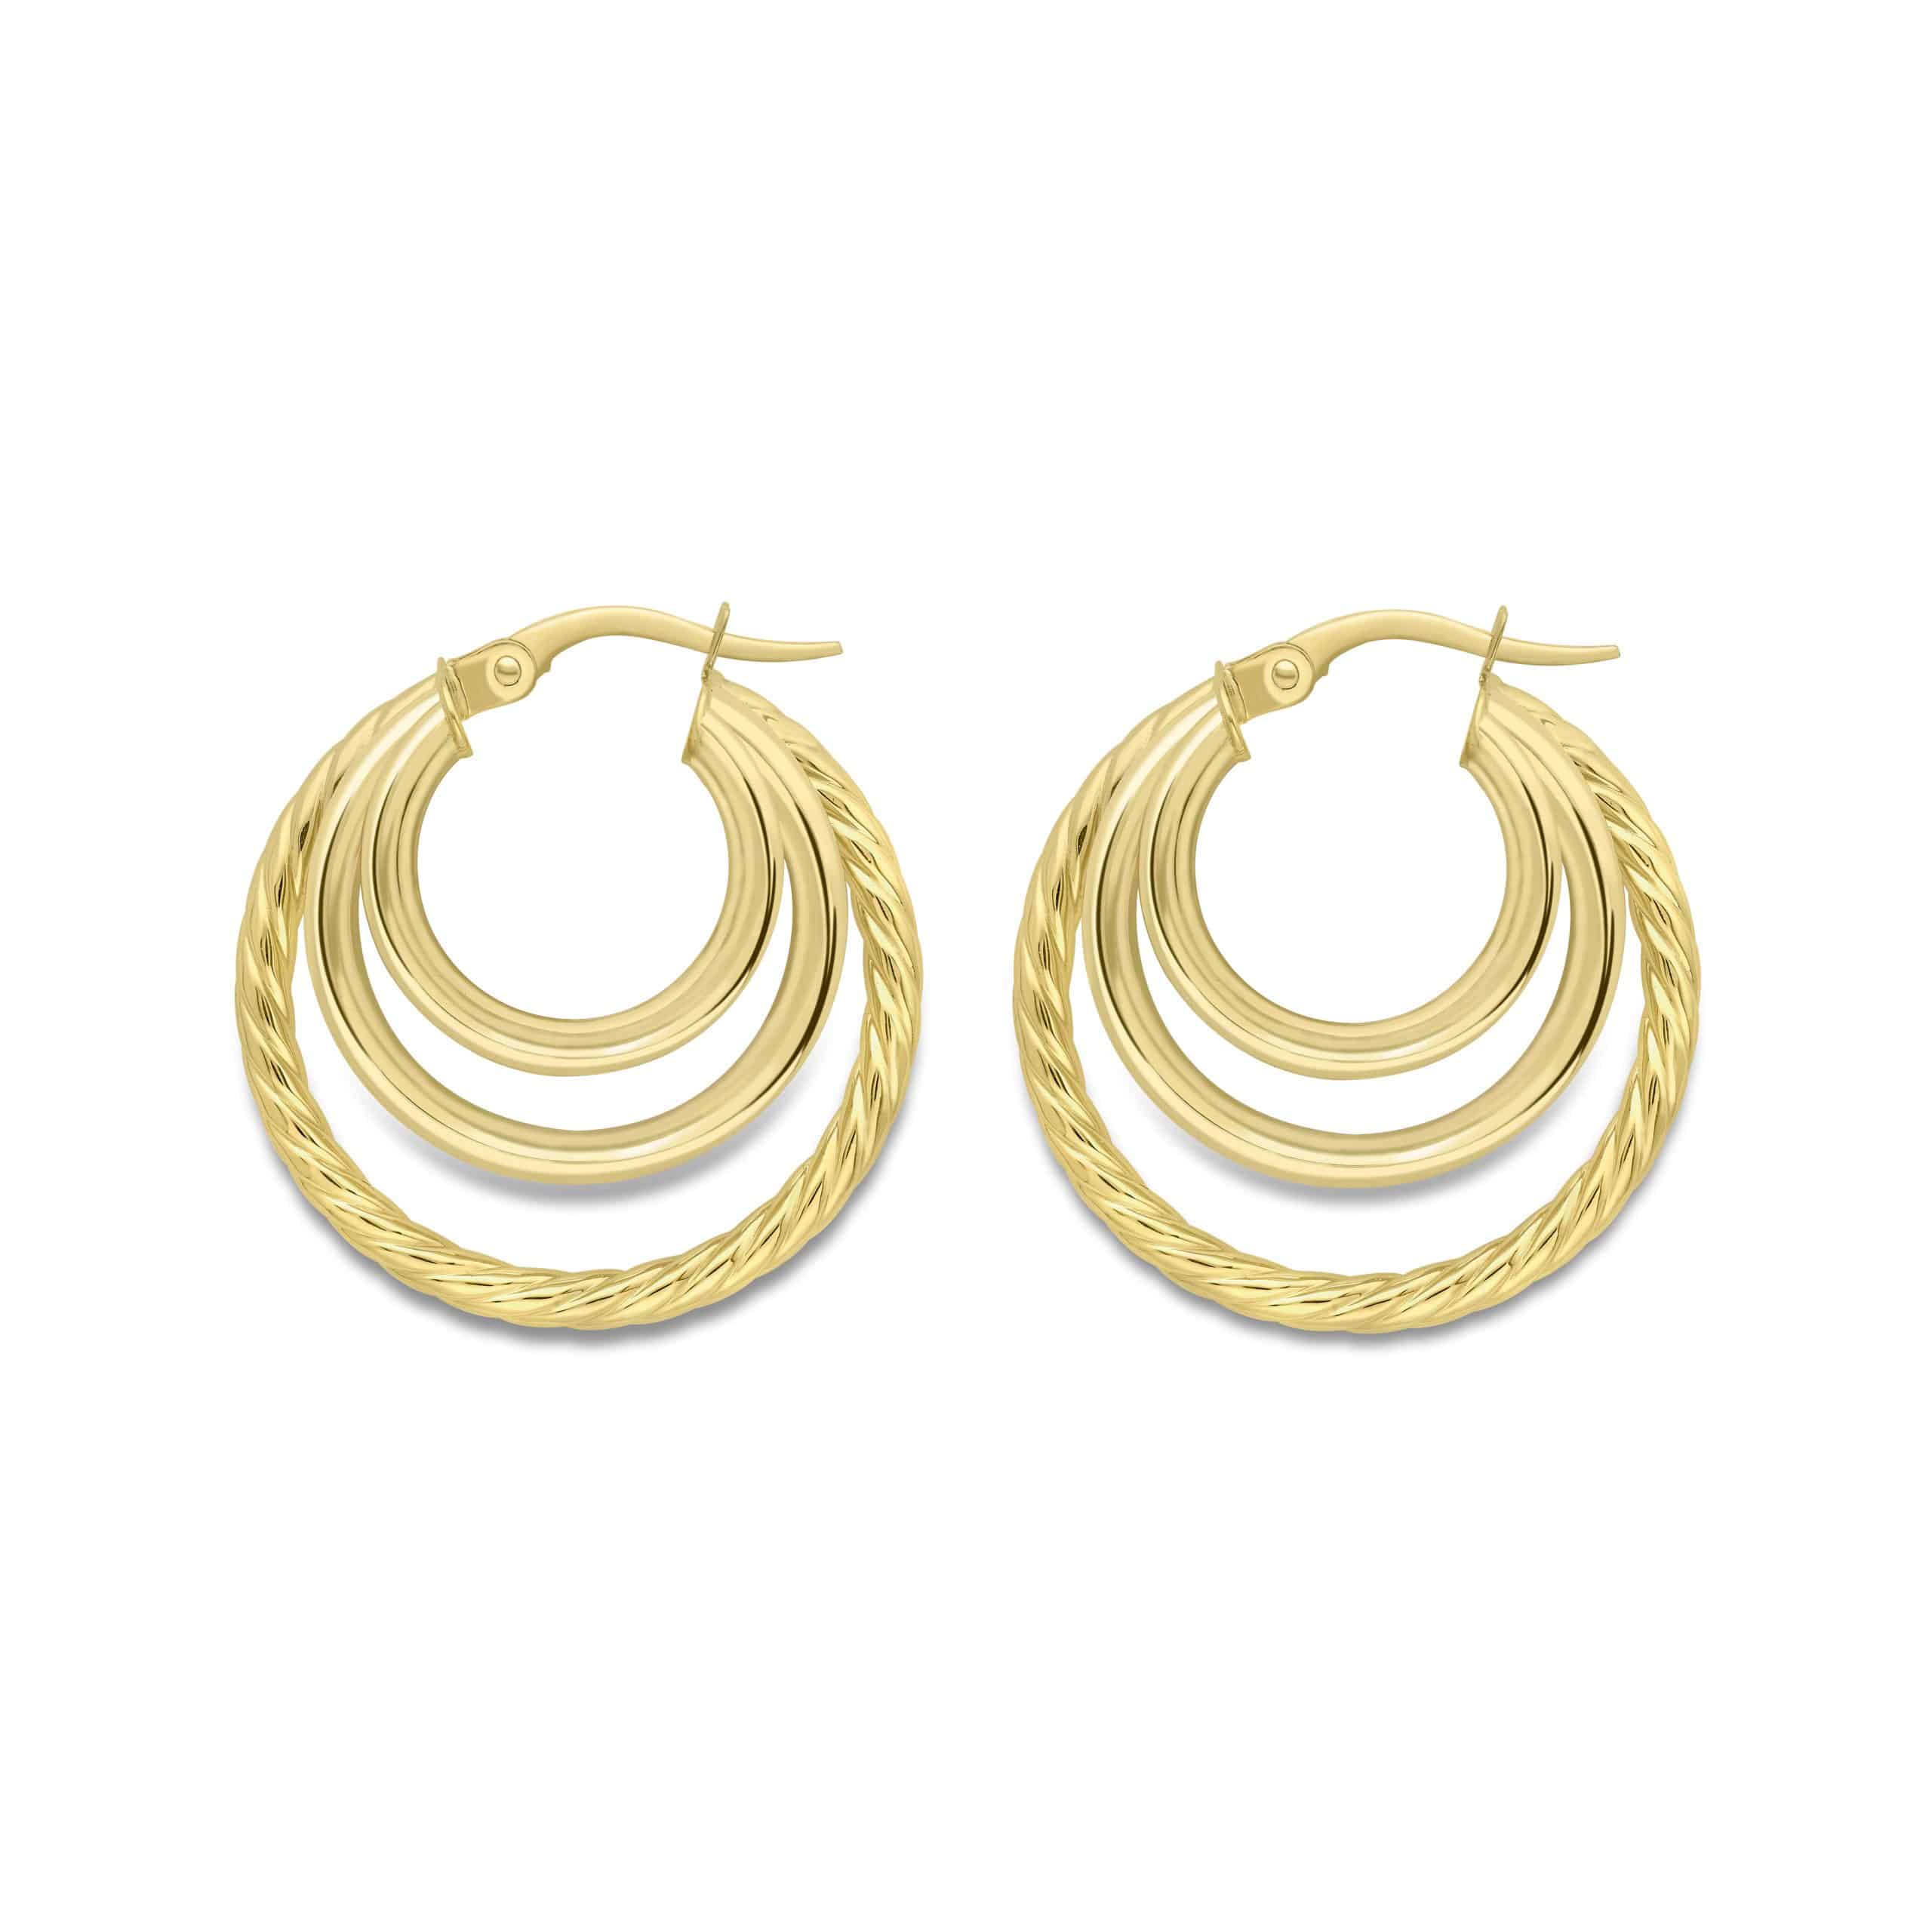 9ct Yellow Gold Three Polished and Twisted Hoop Earrings - Charles Nobel